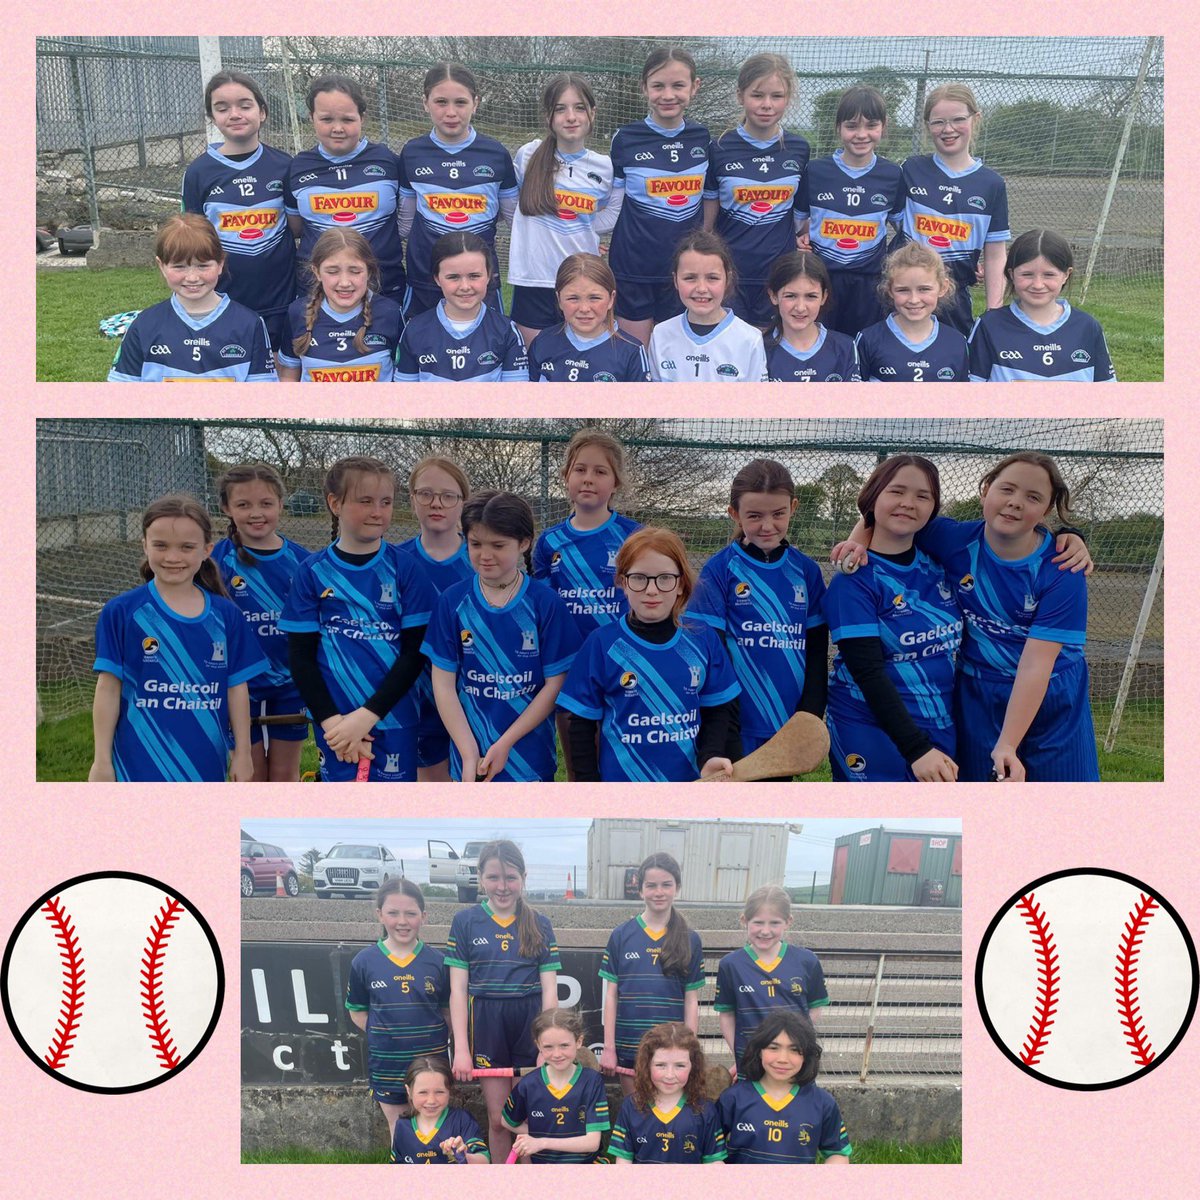 Today in North Antrim we had 14 schools & 160 girls taking part in their Outdoor Camogie Blitz @loughgielgac - congratulations to the winners & runners-up in each of the 4 sections & huge well done to ALL children & teachers who made it such a memorable day of camogie 👏🏼😊